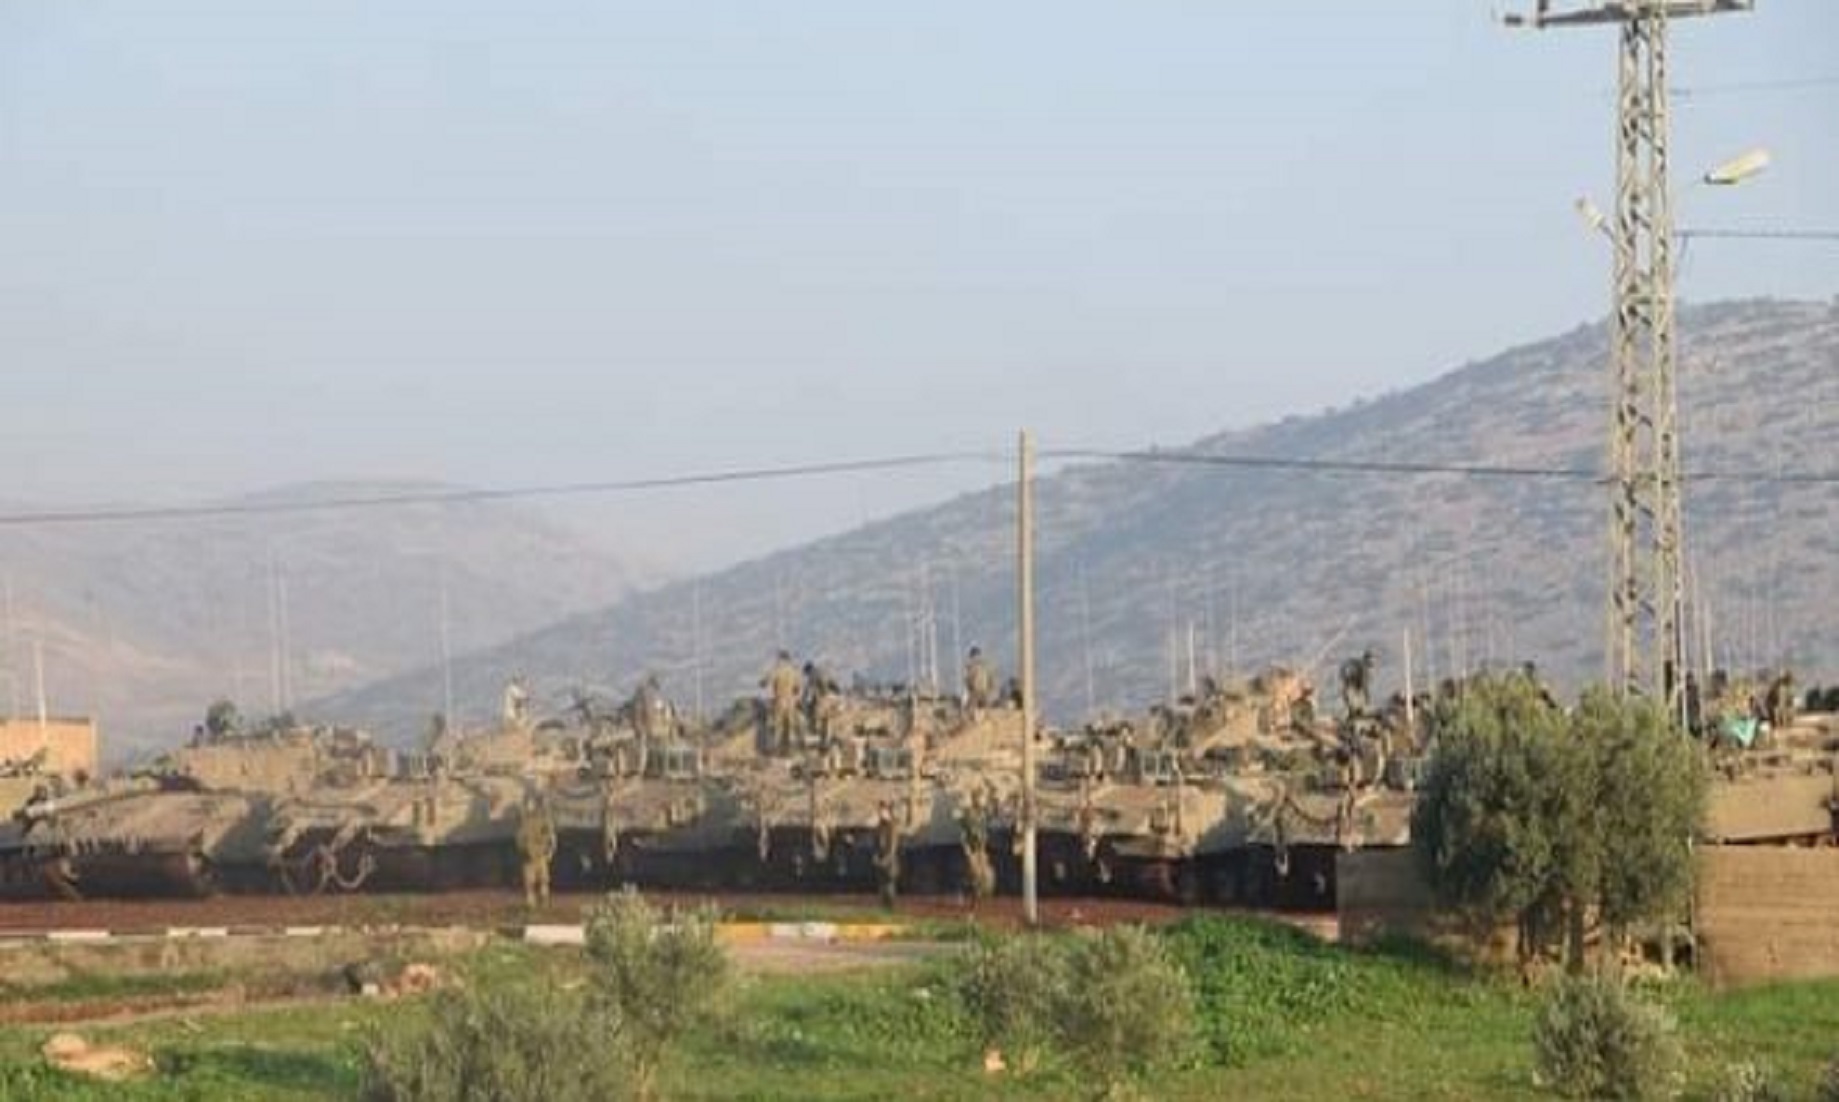 Israel “Annexes Smoothly” West Bank Under Military Training Pretext: Palestinian Officials